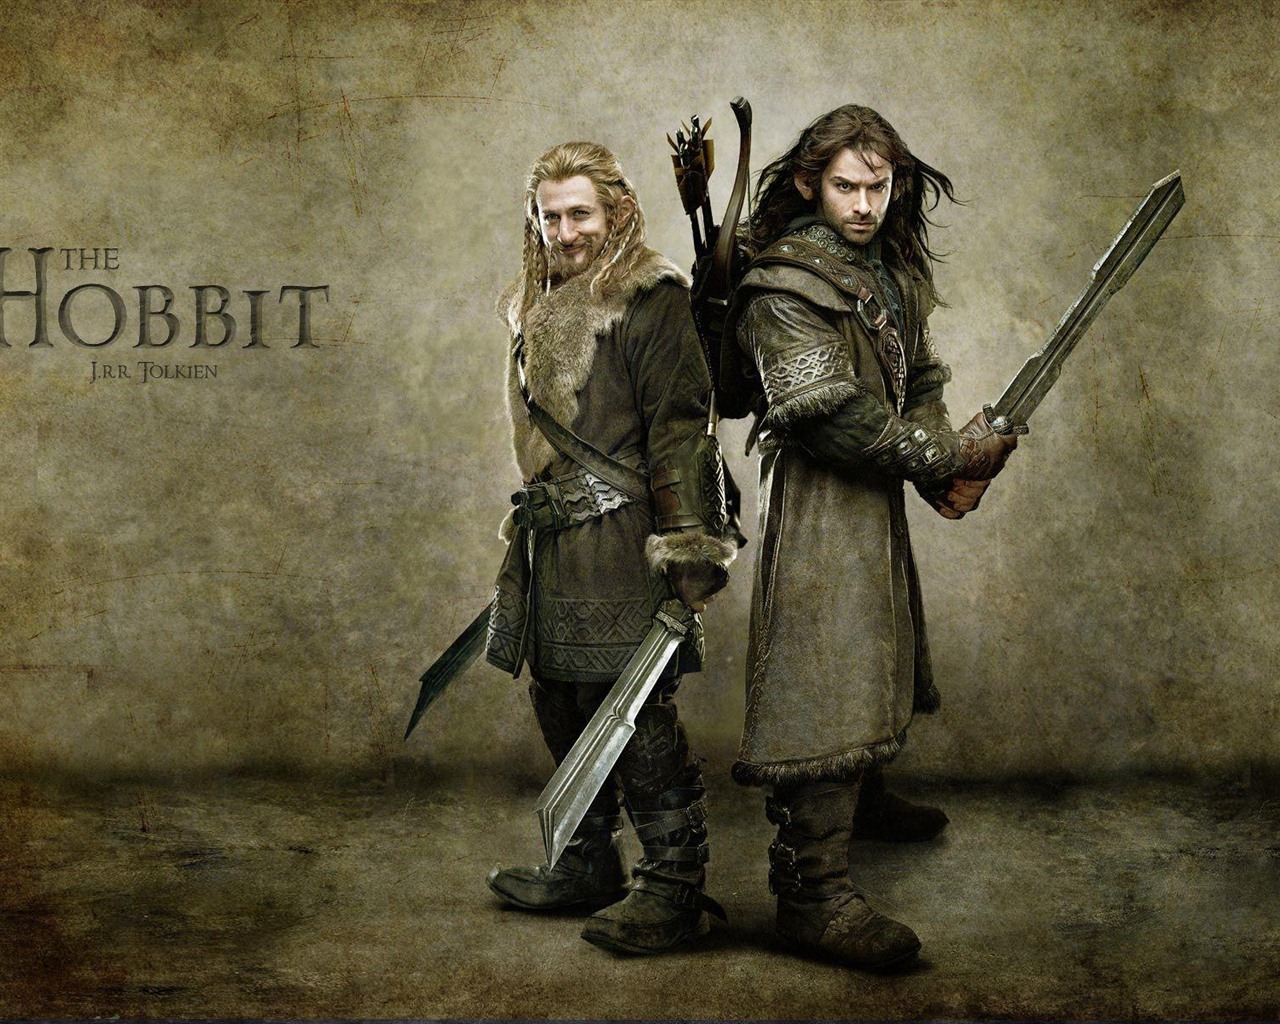 The Hobbit: An Unexpected Journey HD wallpapers #8 - 1280x1024